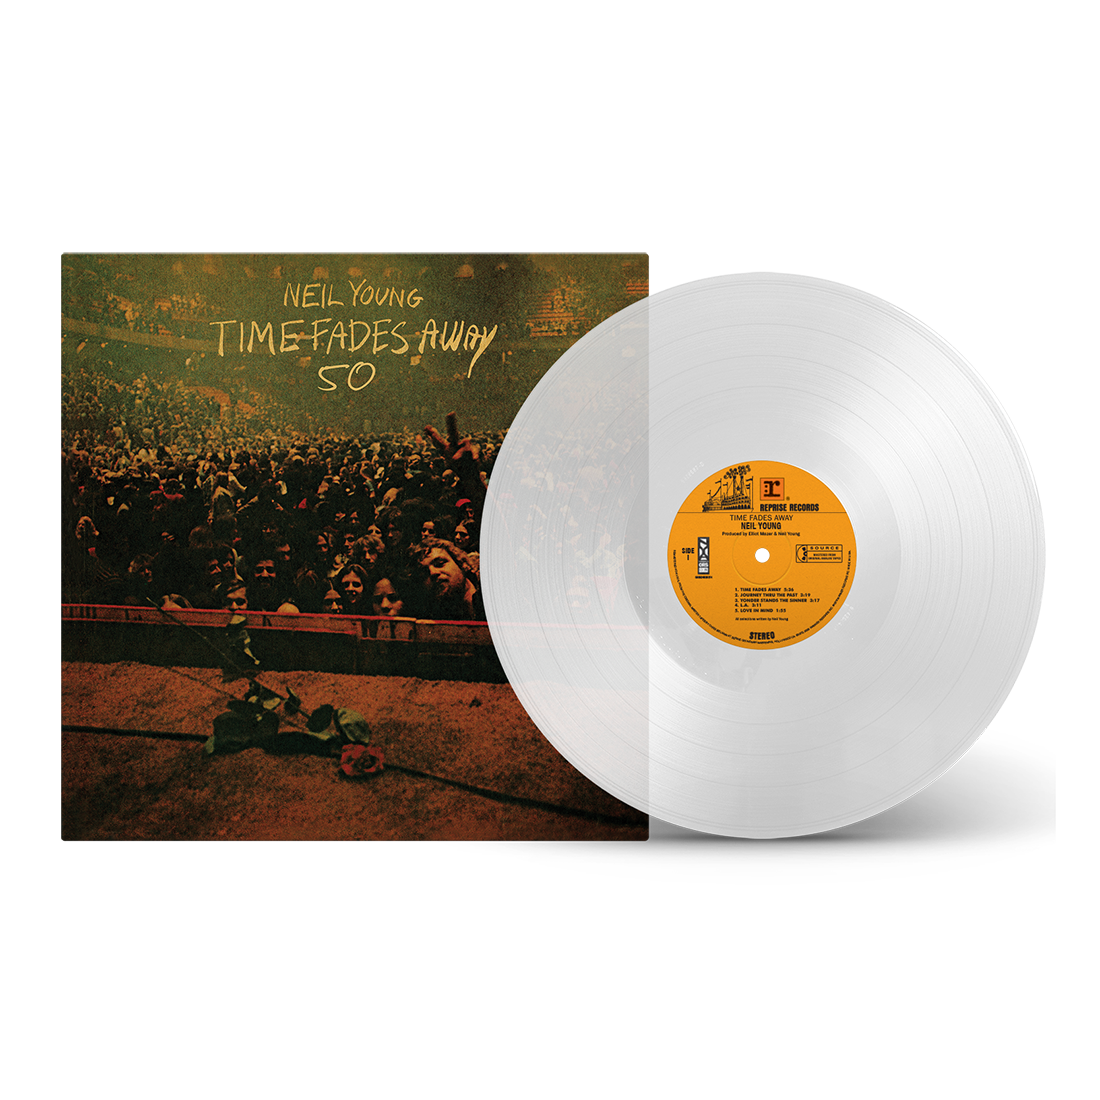 Neil Young - Time Fades Away 50: Clear Vinyl LP